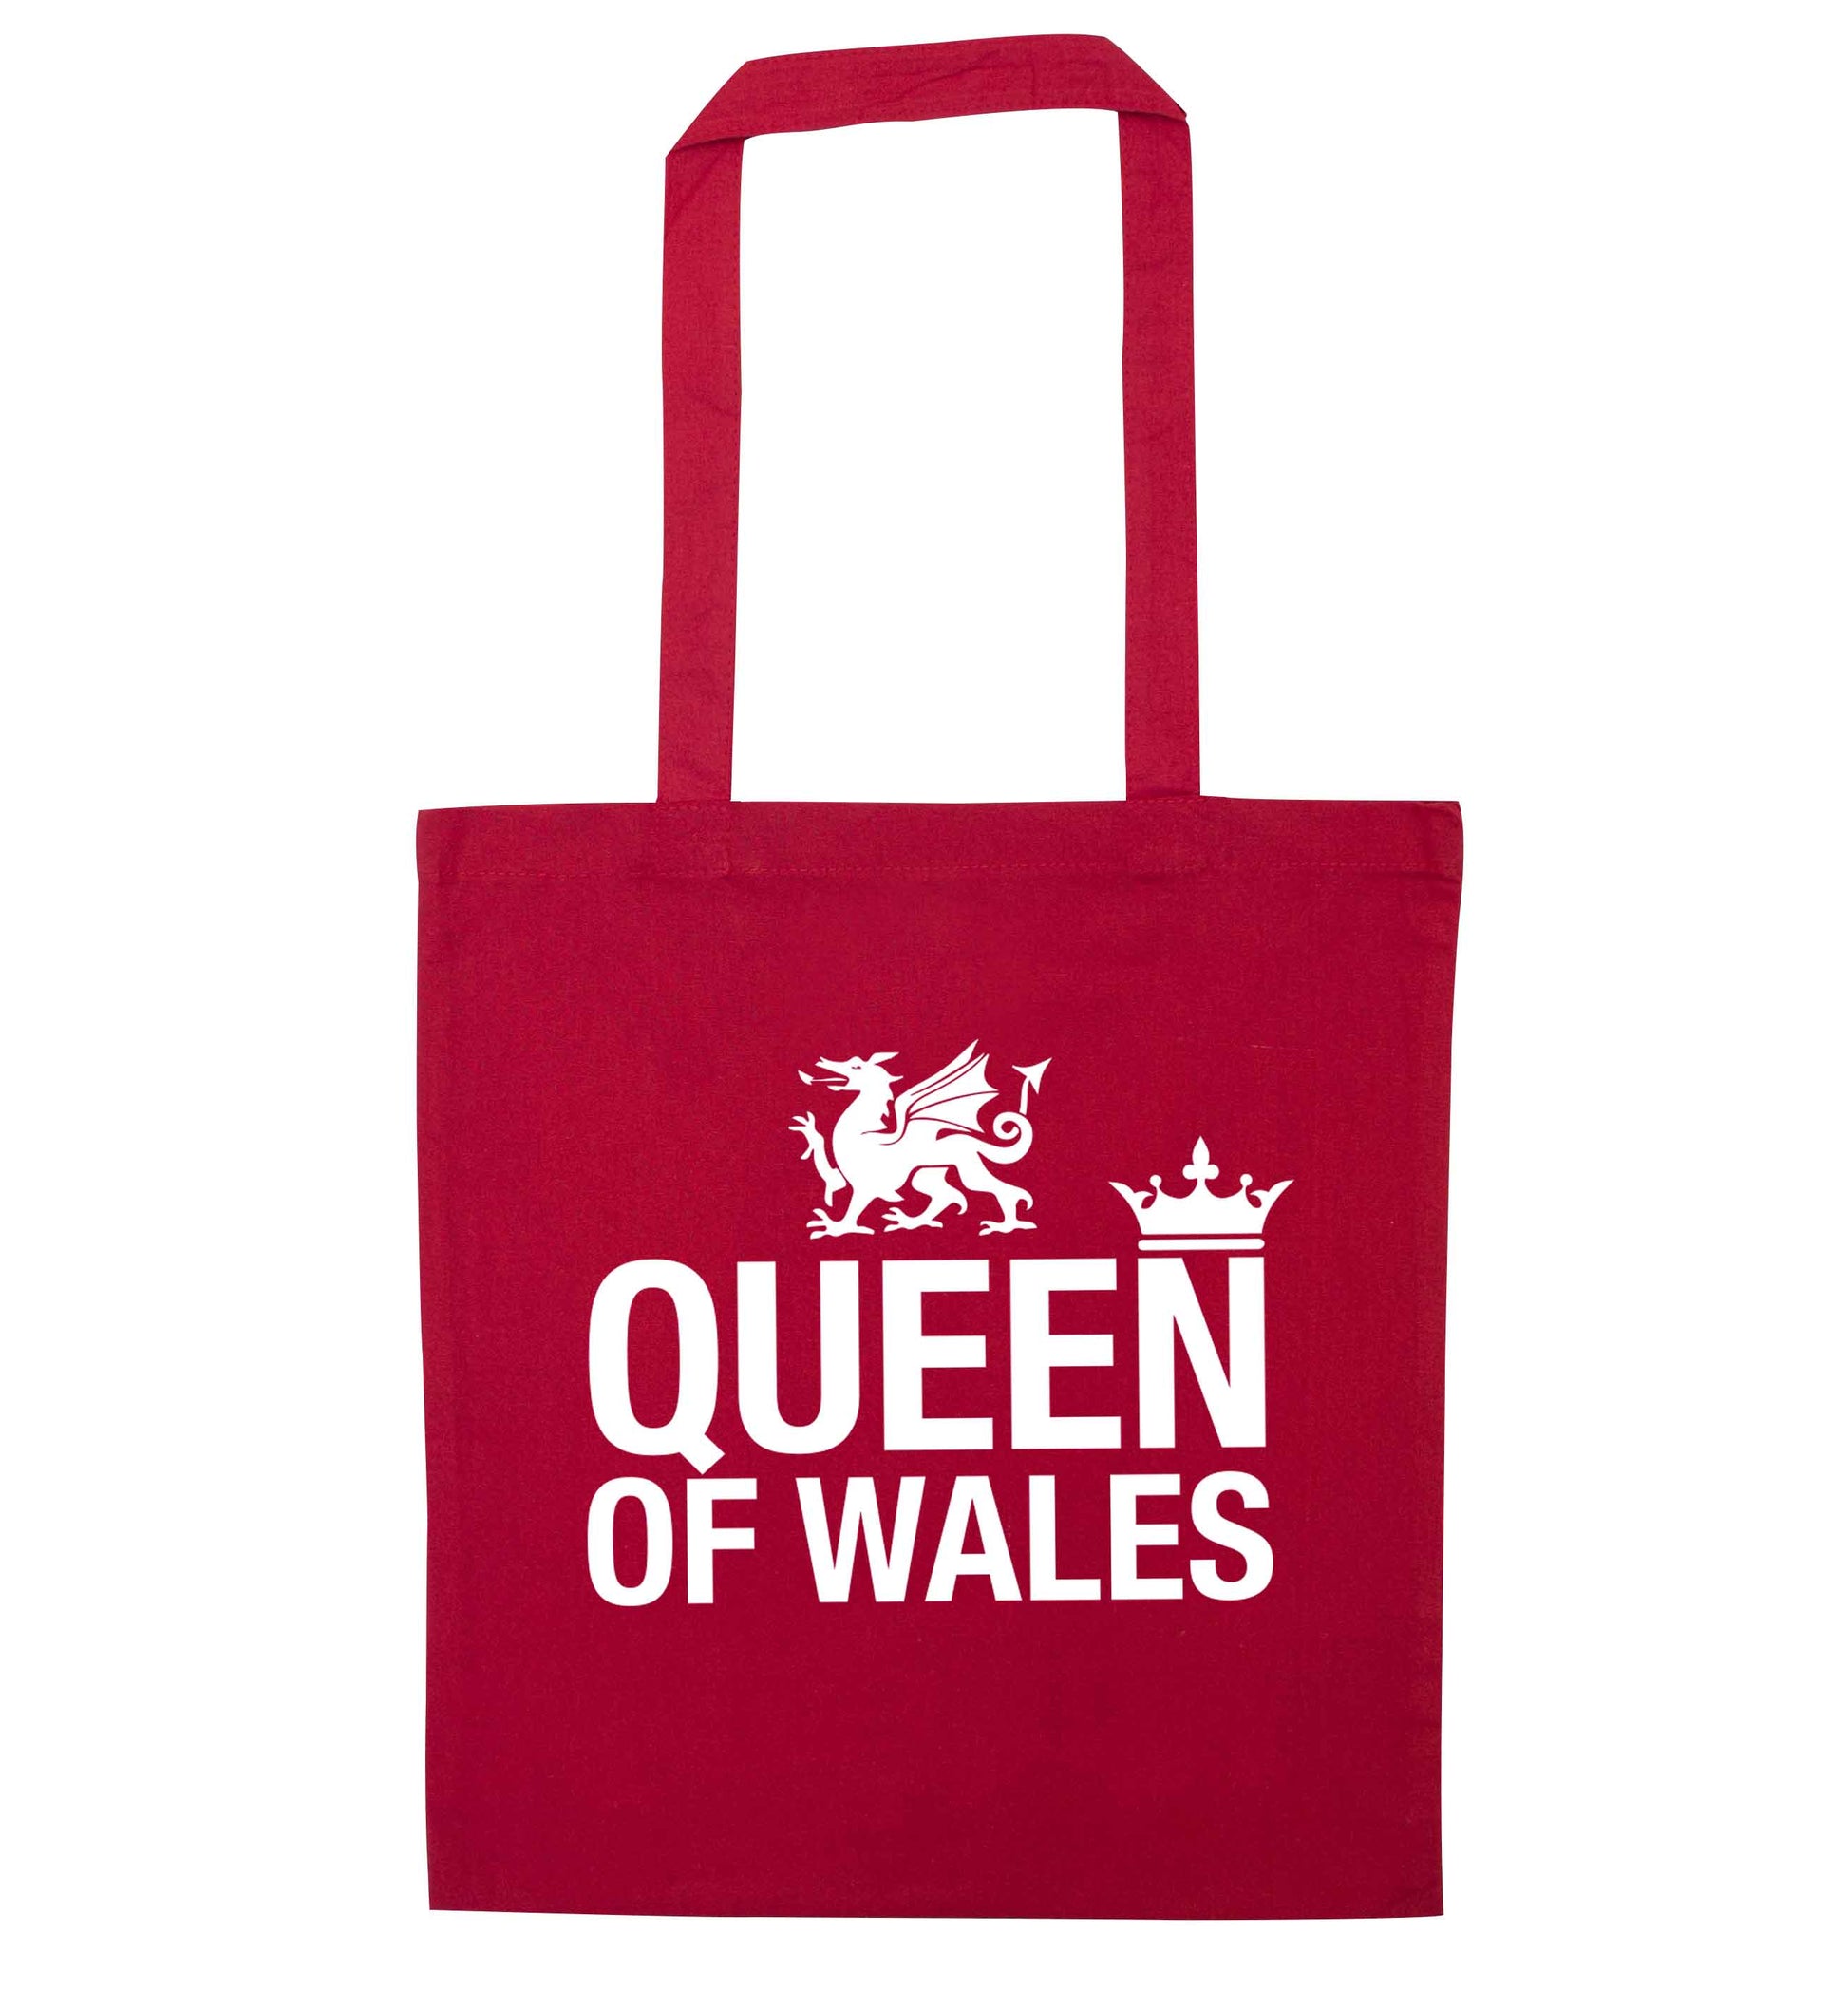 Queen of Wales red tote bag